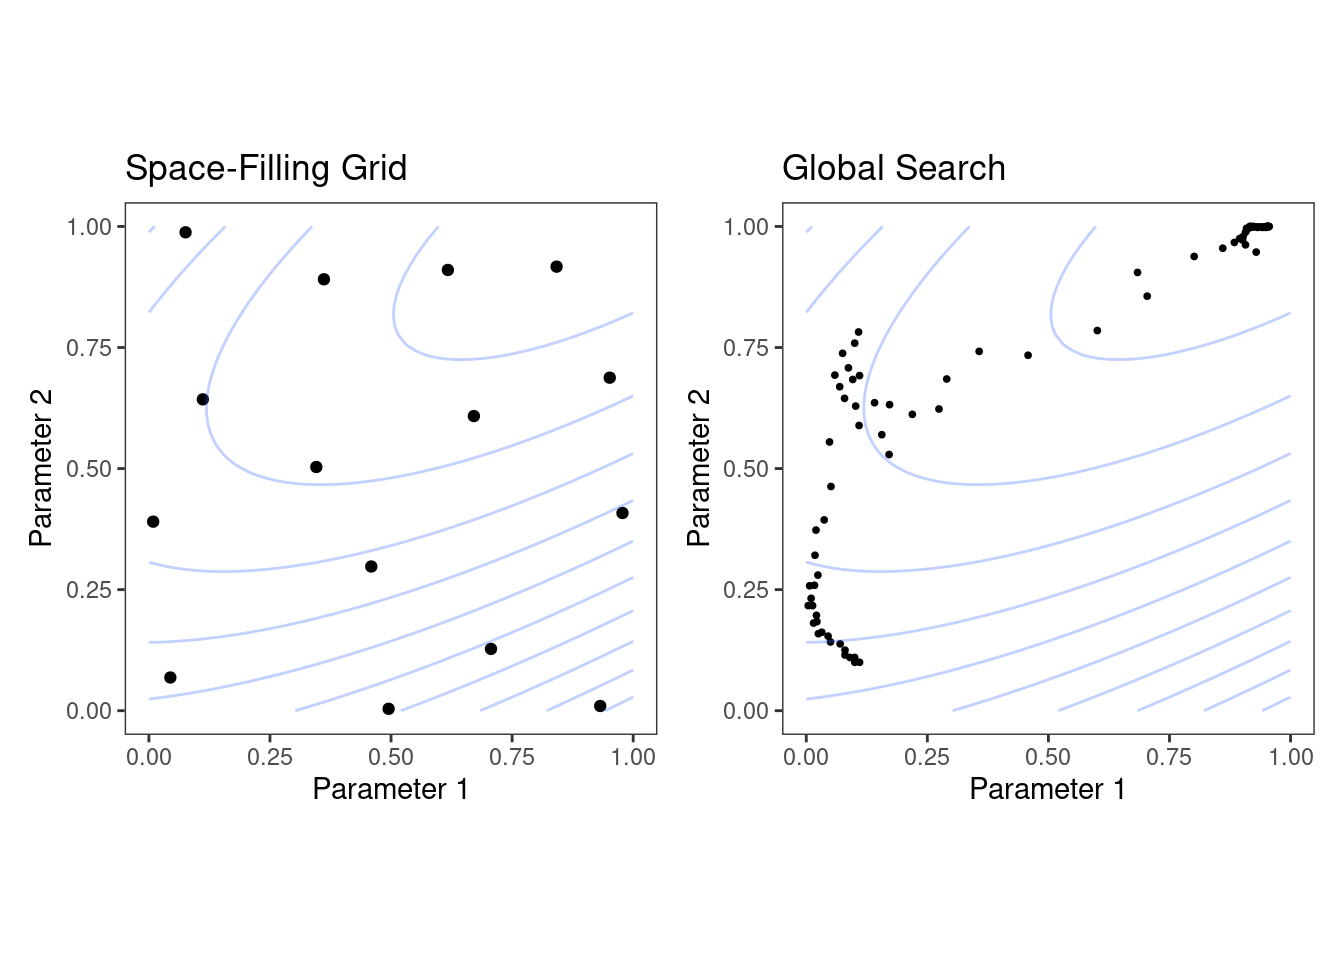 Examples of pre-defined grid tuning and an iterative search method. The lines represent contours of some performance metric that is best in the upper-right-hand side of the plot. The grid search shows points that cover the space well and has one point near the optimum. The iterative search method has many more points and meanders to the optimum where many points zero in on the best value.